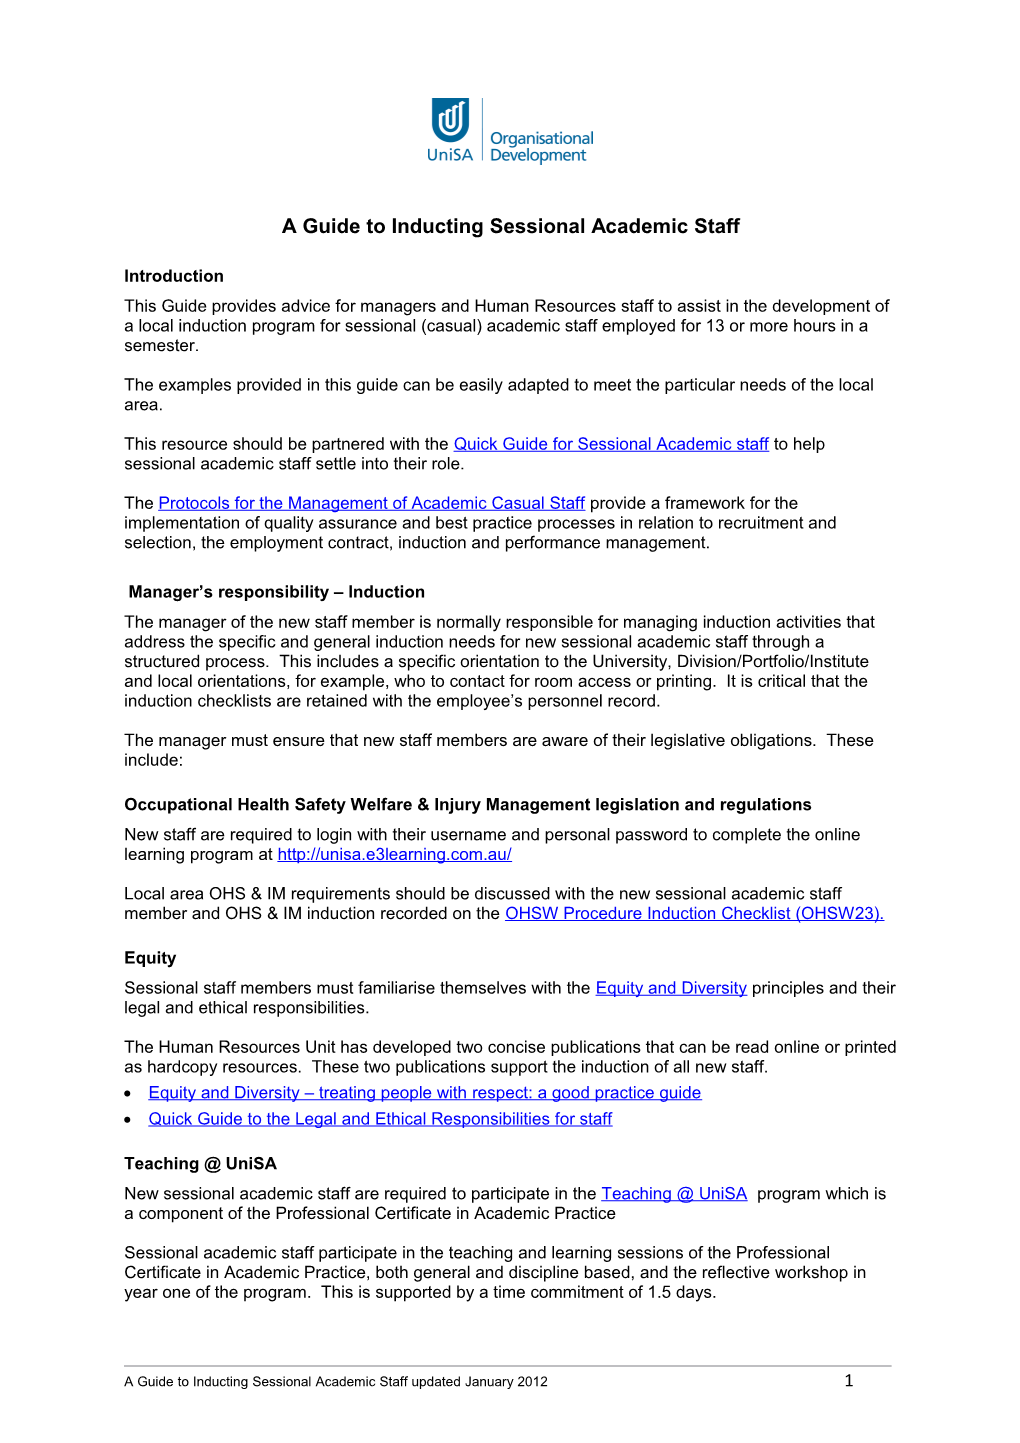 A Guide to Inducting Sessional Academic Staff